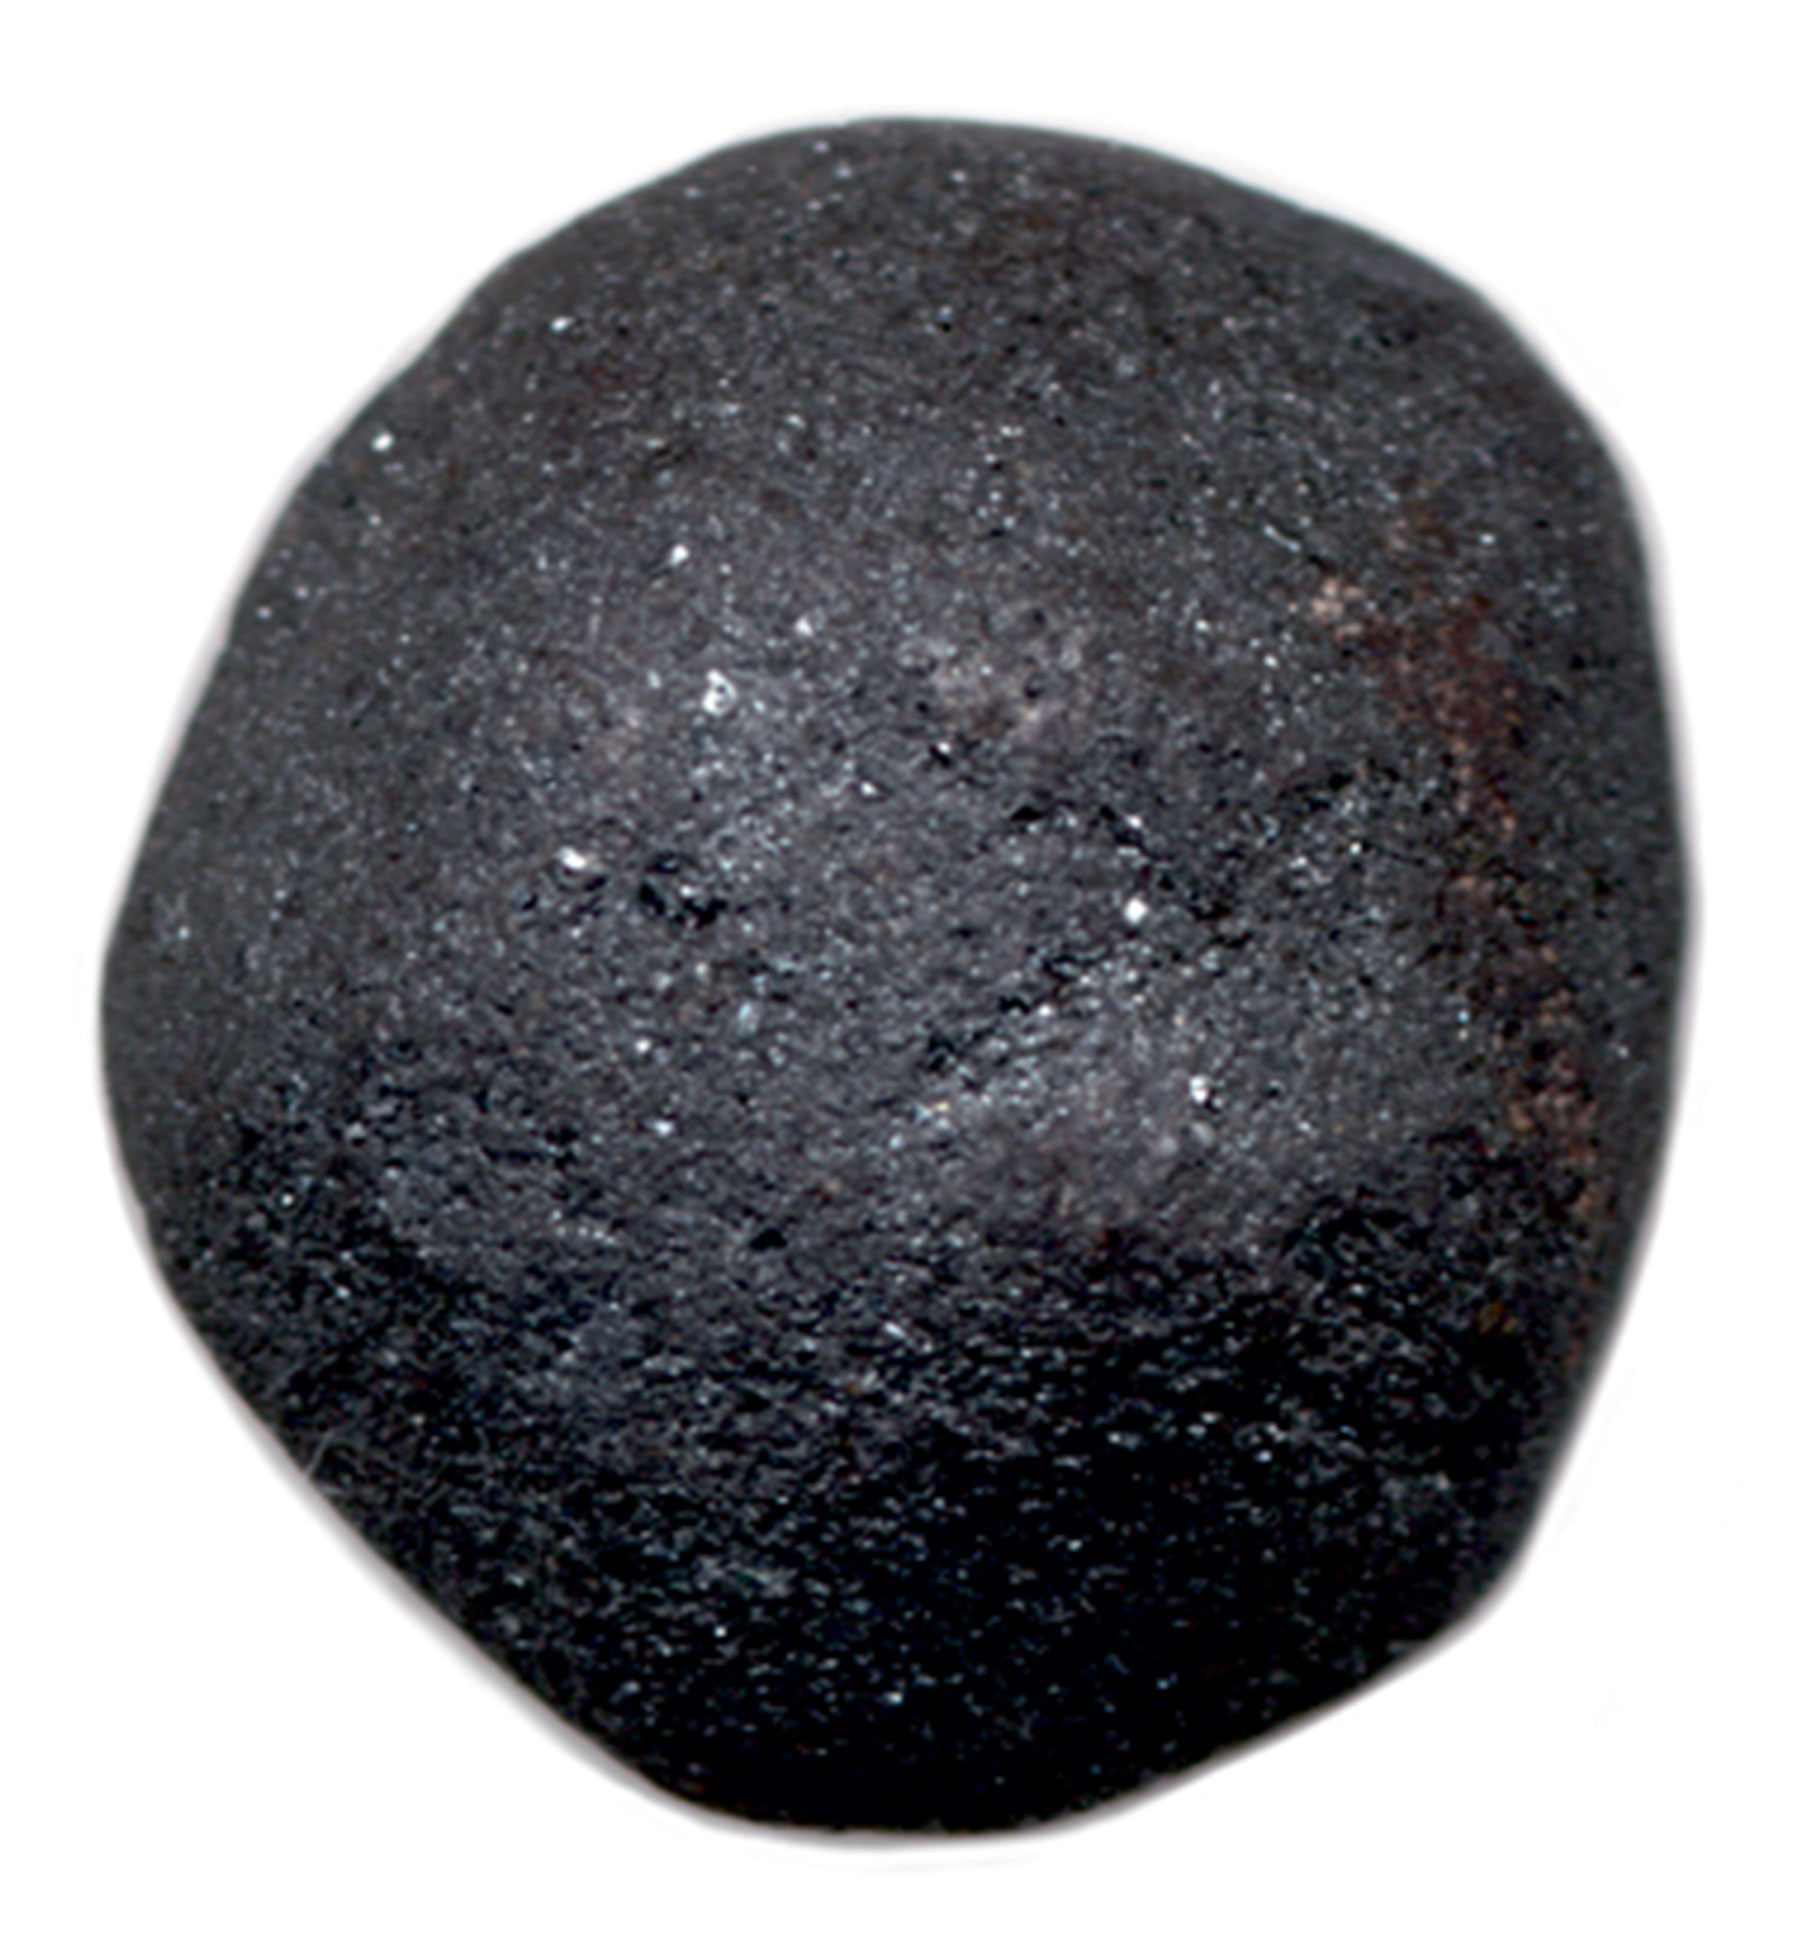 A photograph of a rock which resembles a milk dud. 